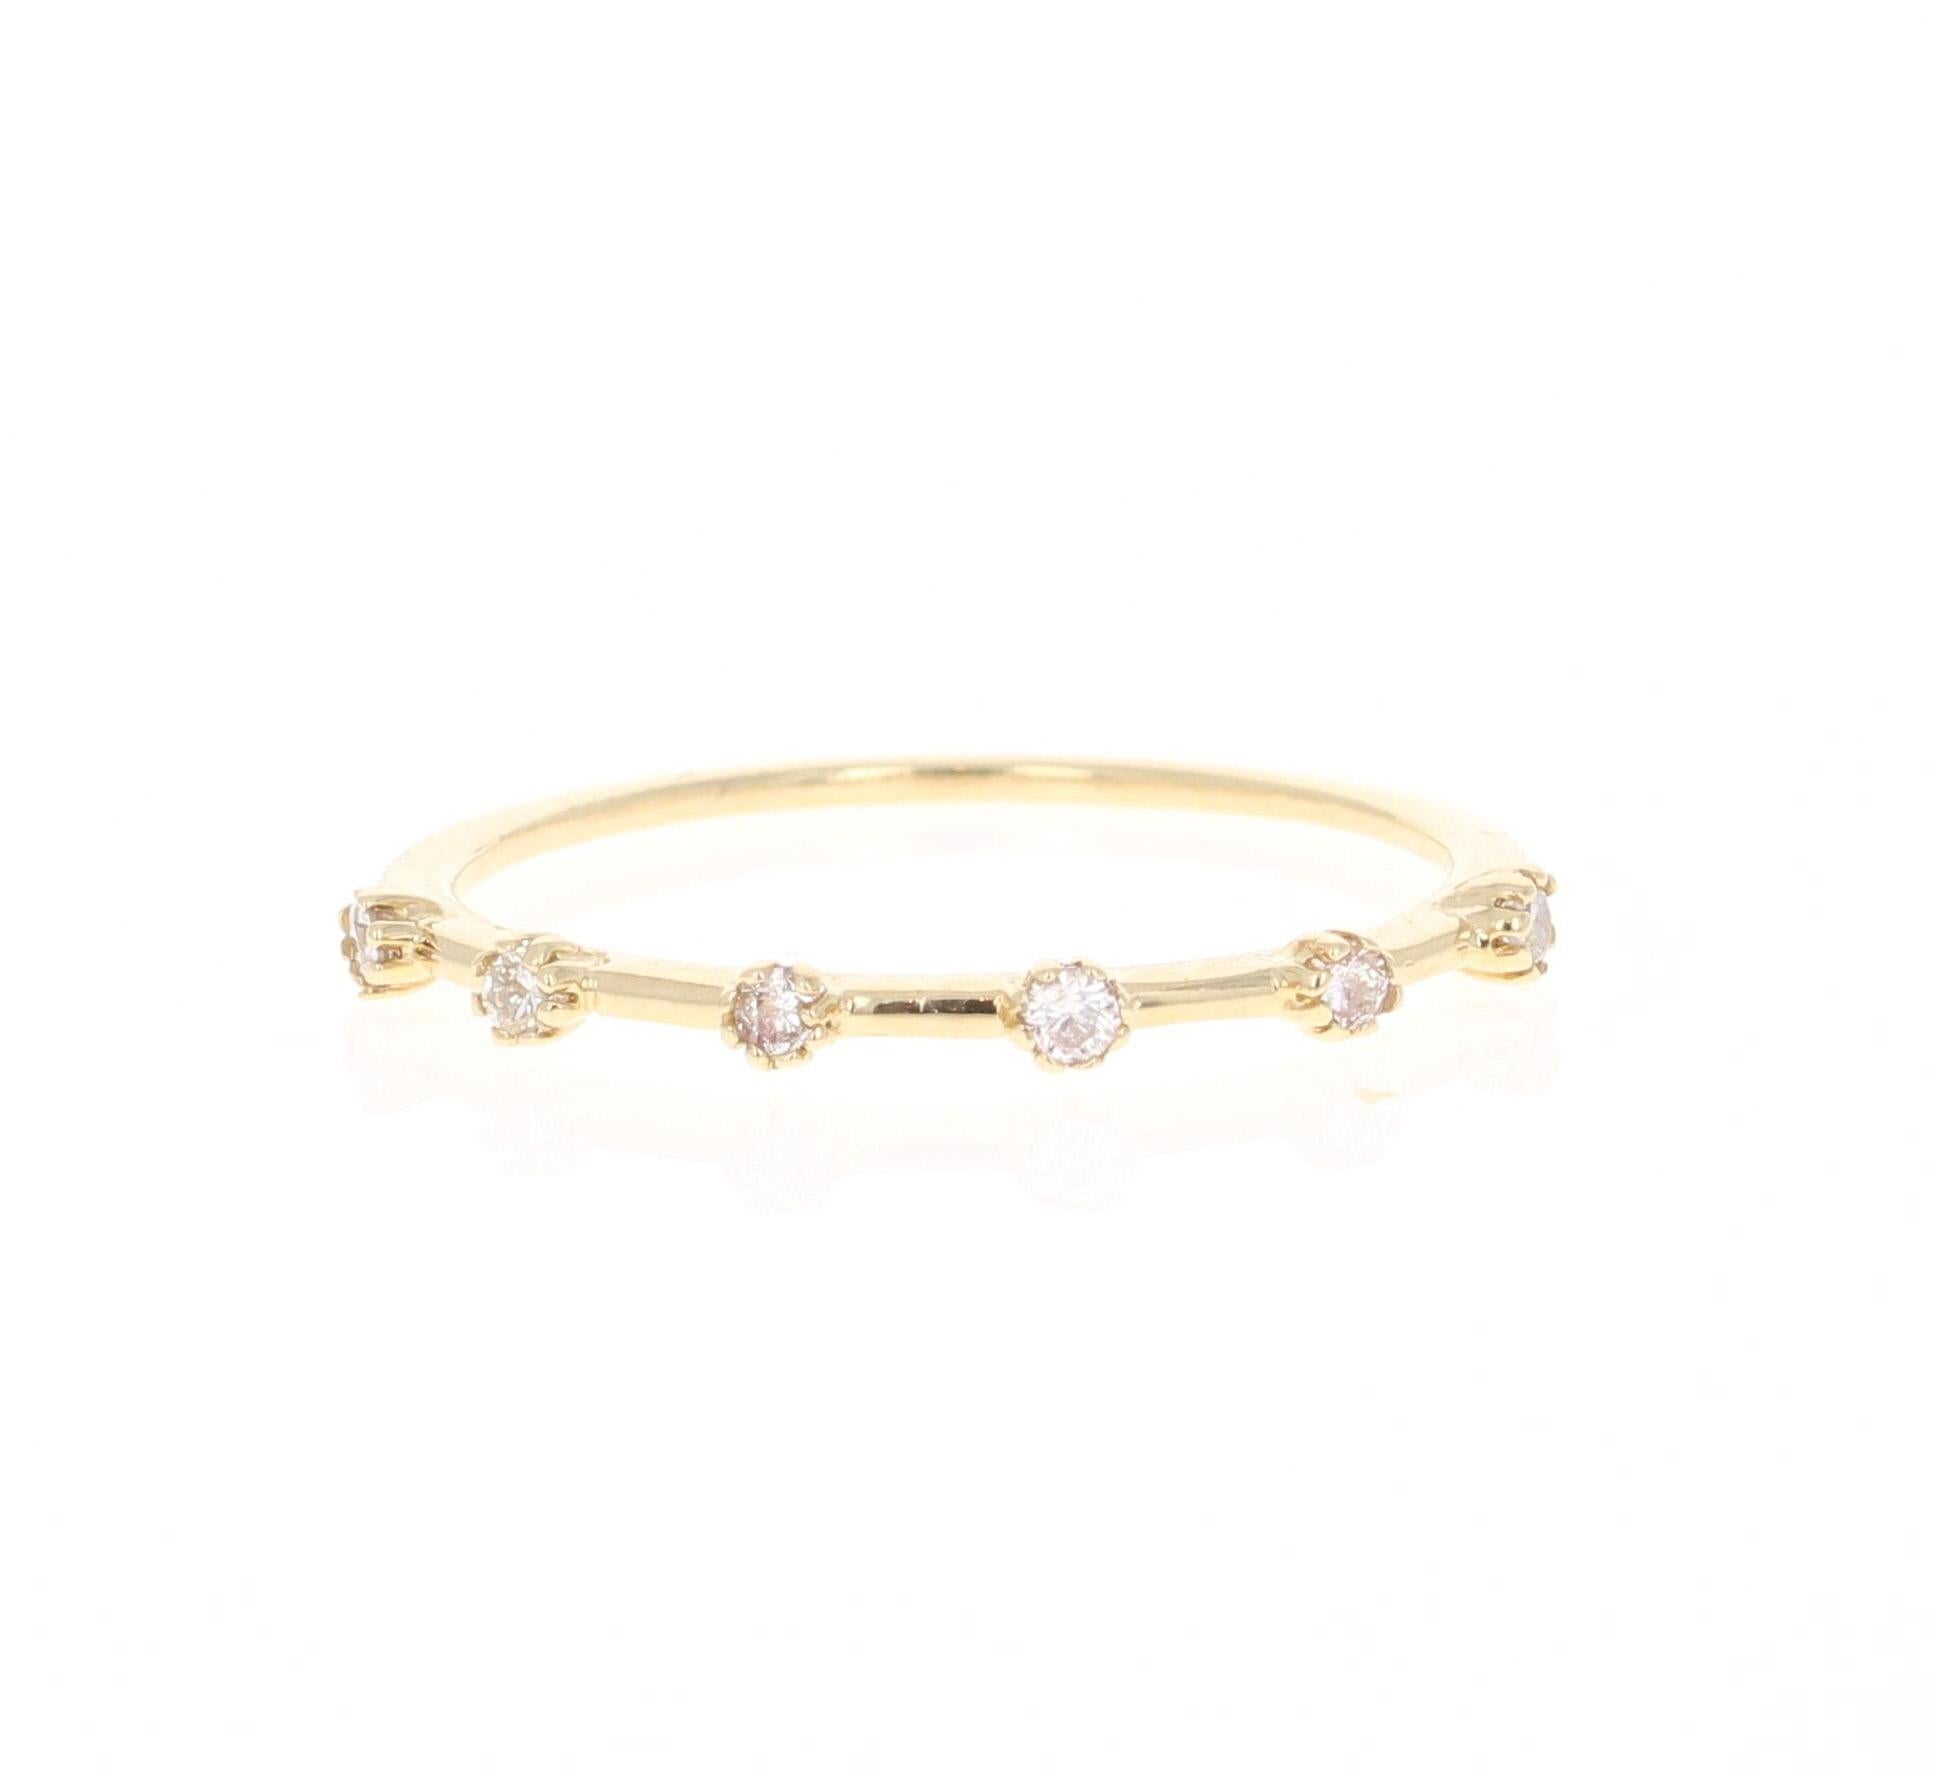 Cute and dainty 0.34 Carat Diamond Bands that are sure to be a great addition to anyone's accessory collection. Plus they can be worn altogether or separately. Stack 2 or 3 together or put a couple around a chain and wear them in your neck. You can